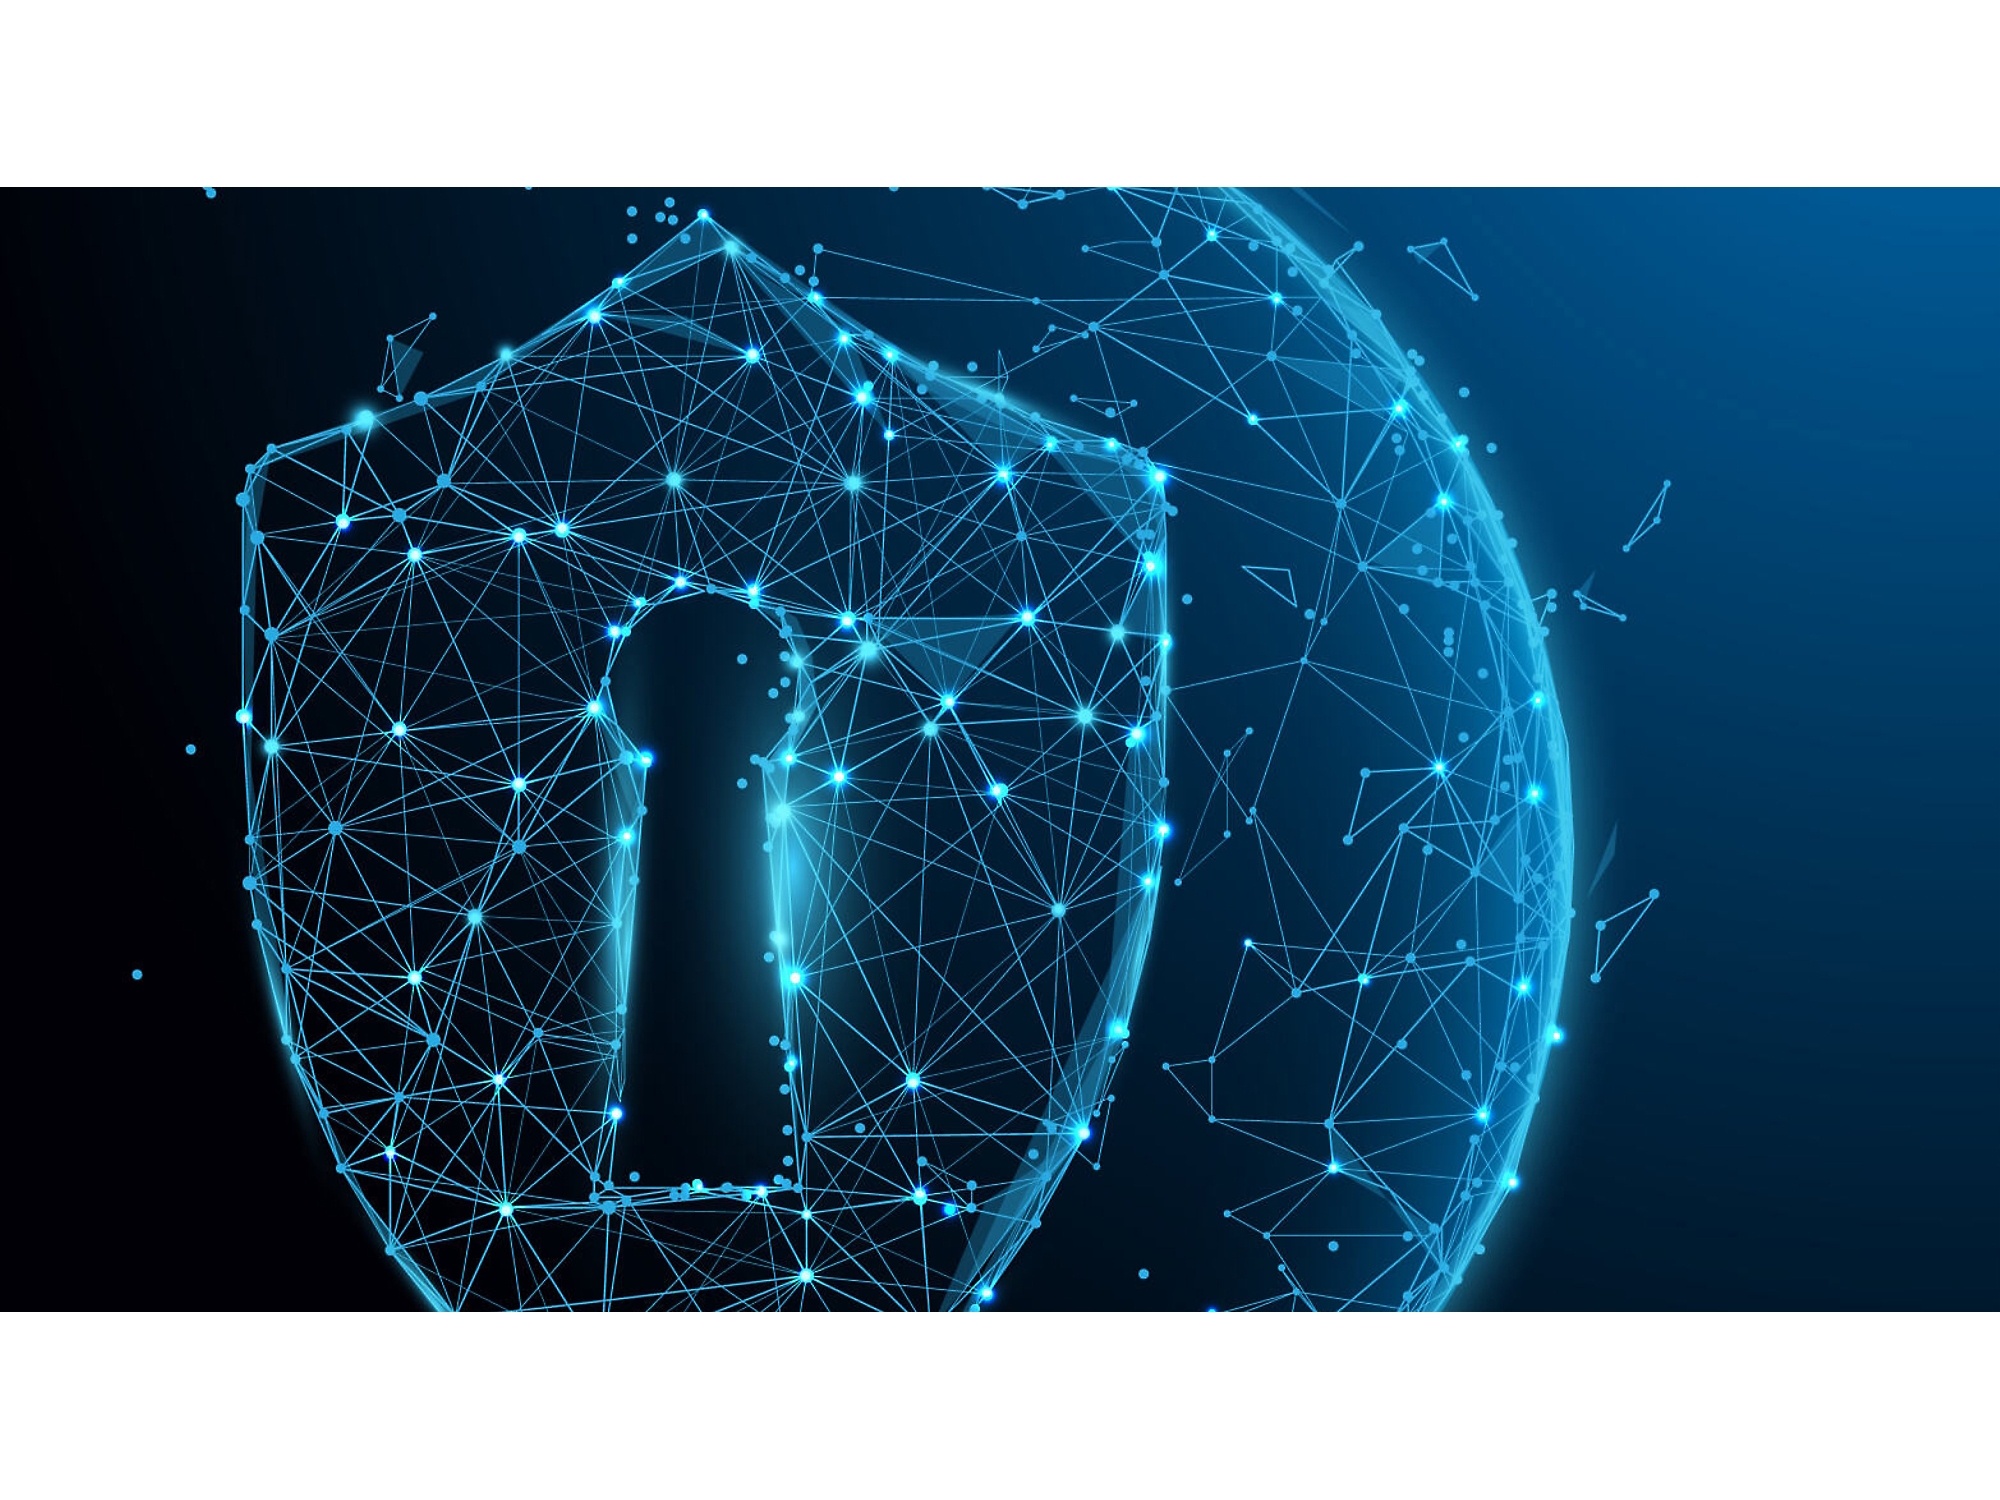 Digital illustration of a glowing blue wireframe shield with a keyhole, symbolizing cybersecurity